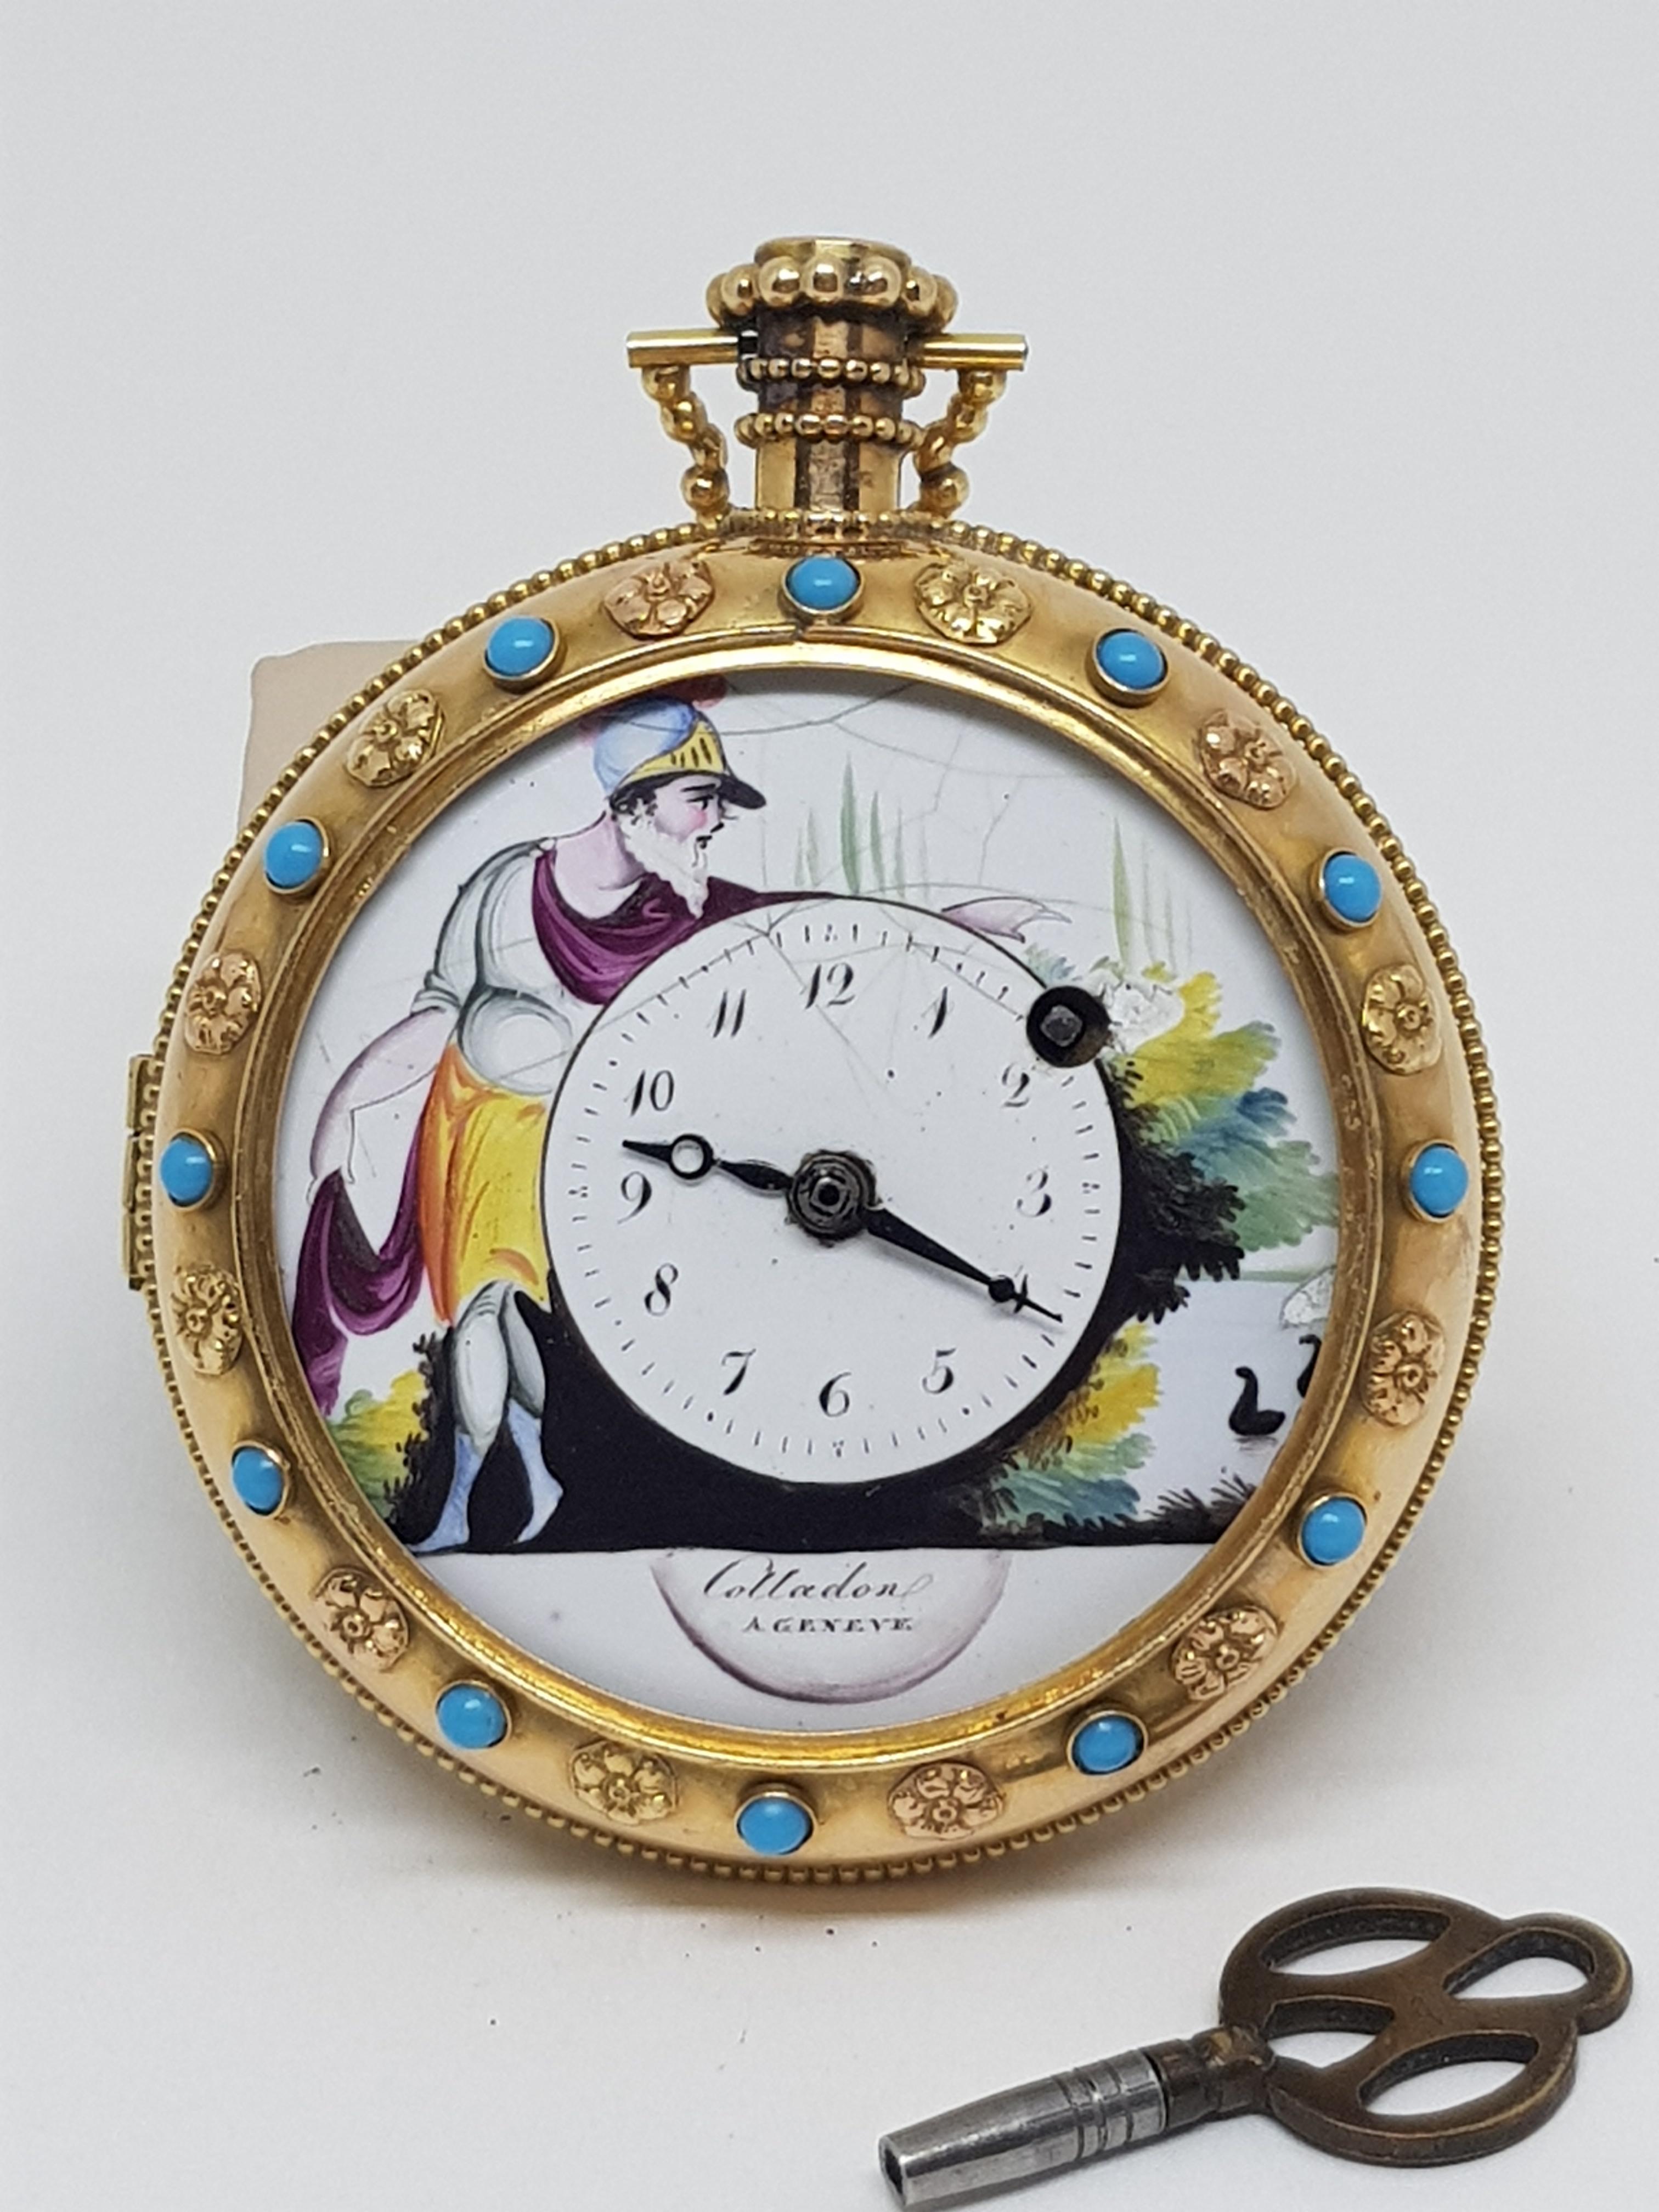 Colladon A. Geneve Antique Turquoise Baby Pearls Enamel Gold Pocket Watch For Sale 6